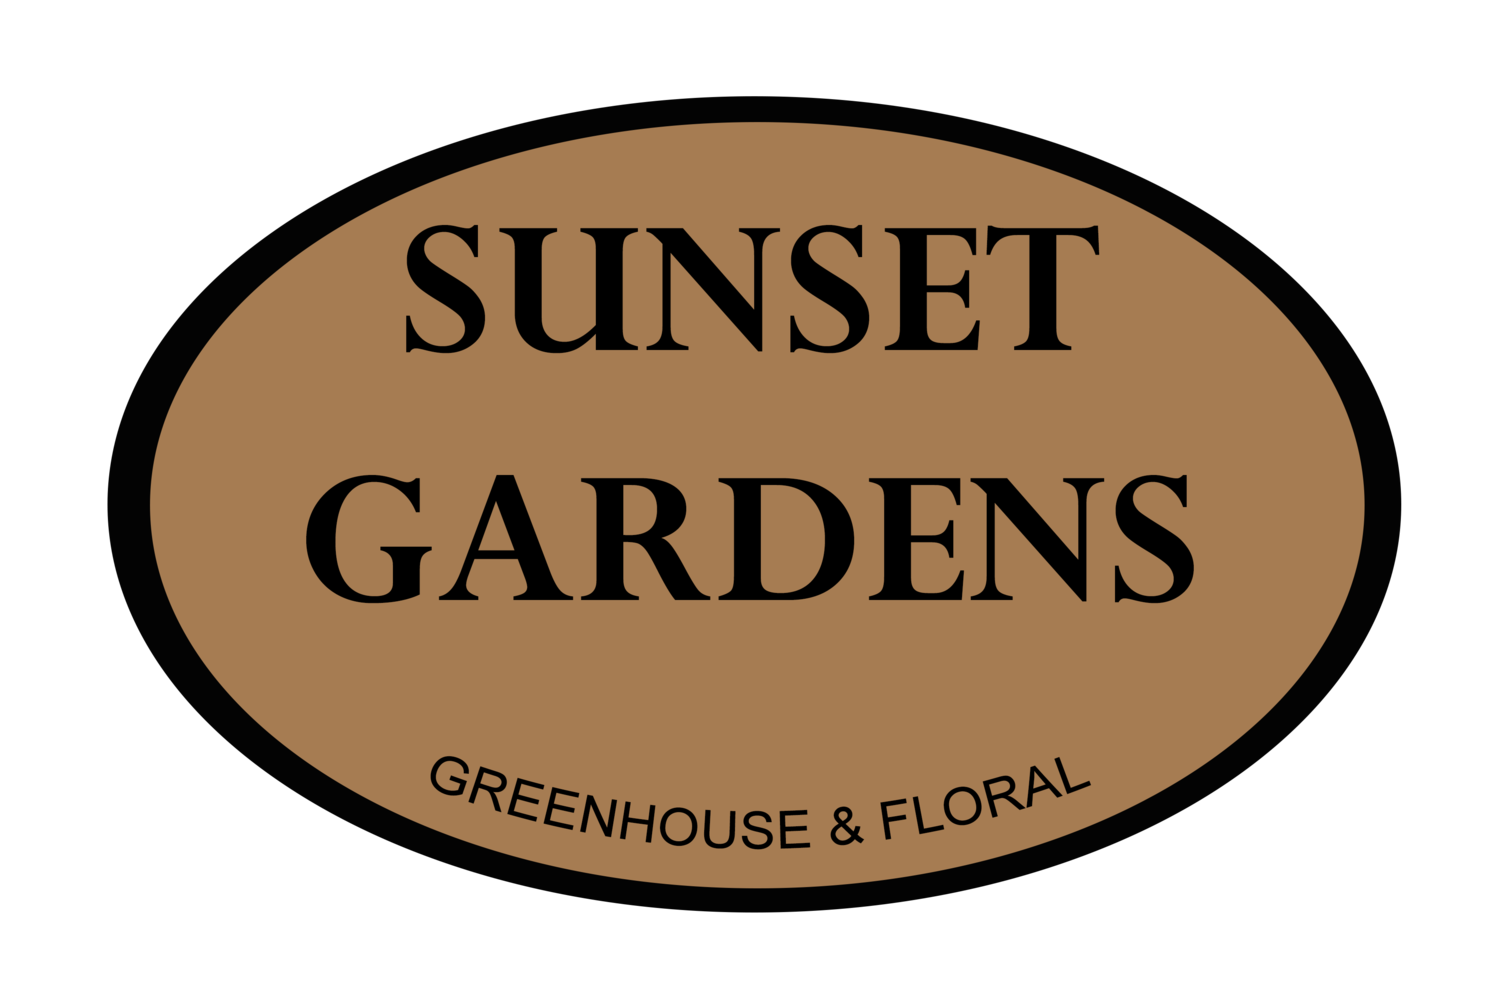 Sunset Gardens Greenhouse &amp; Floral